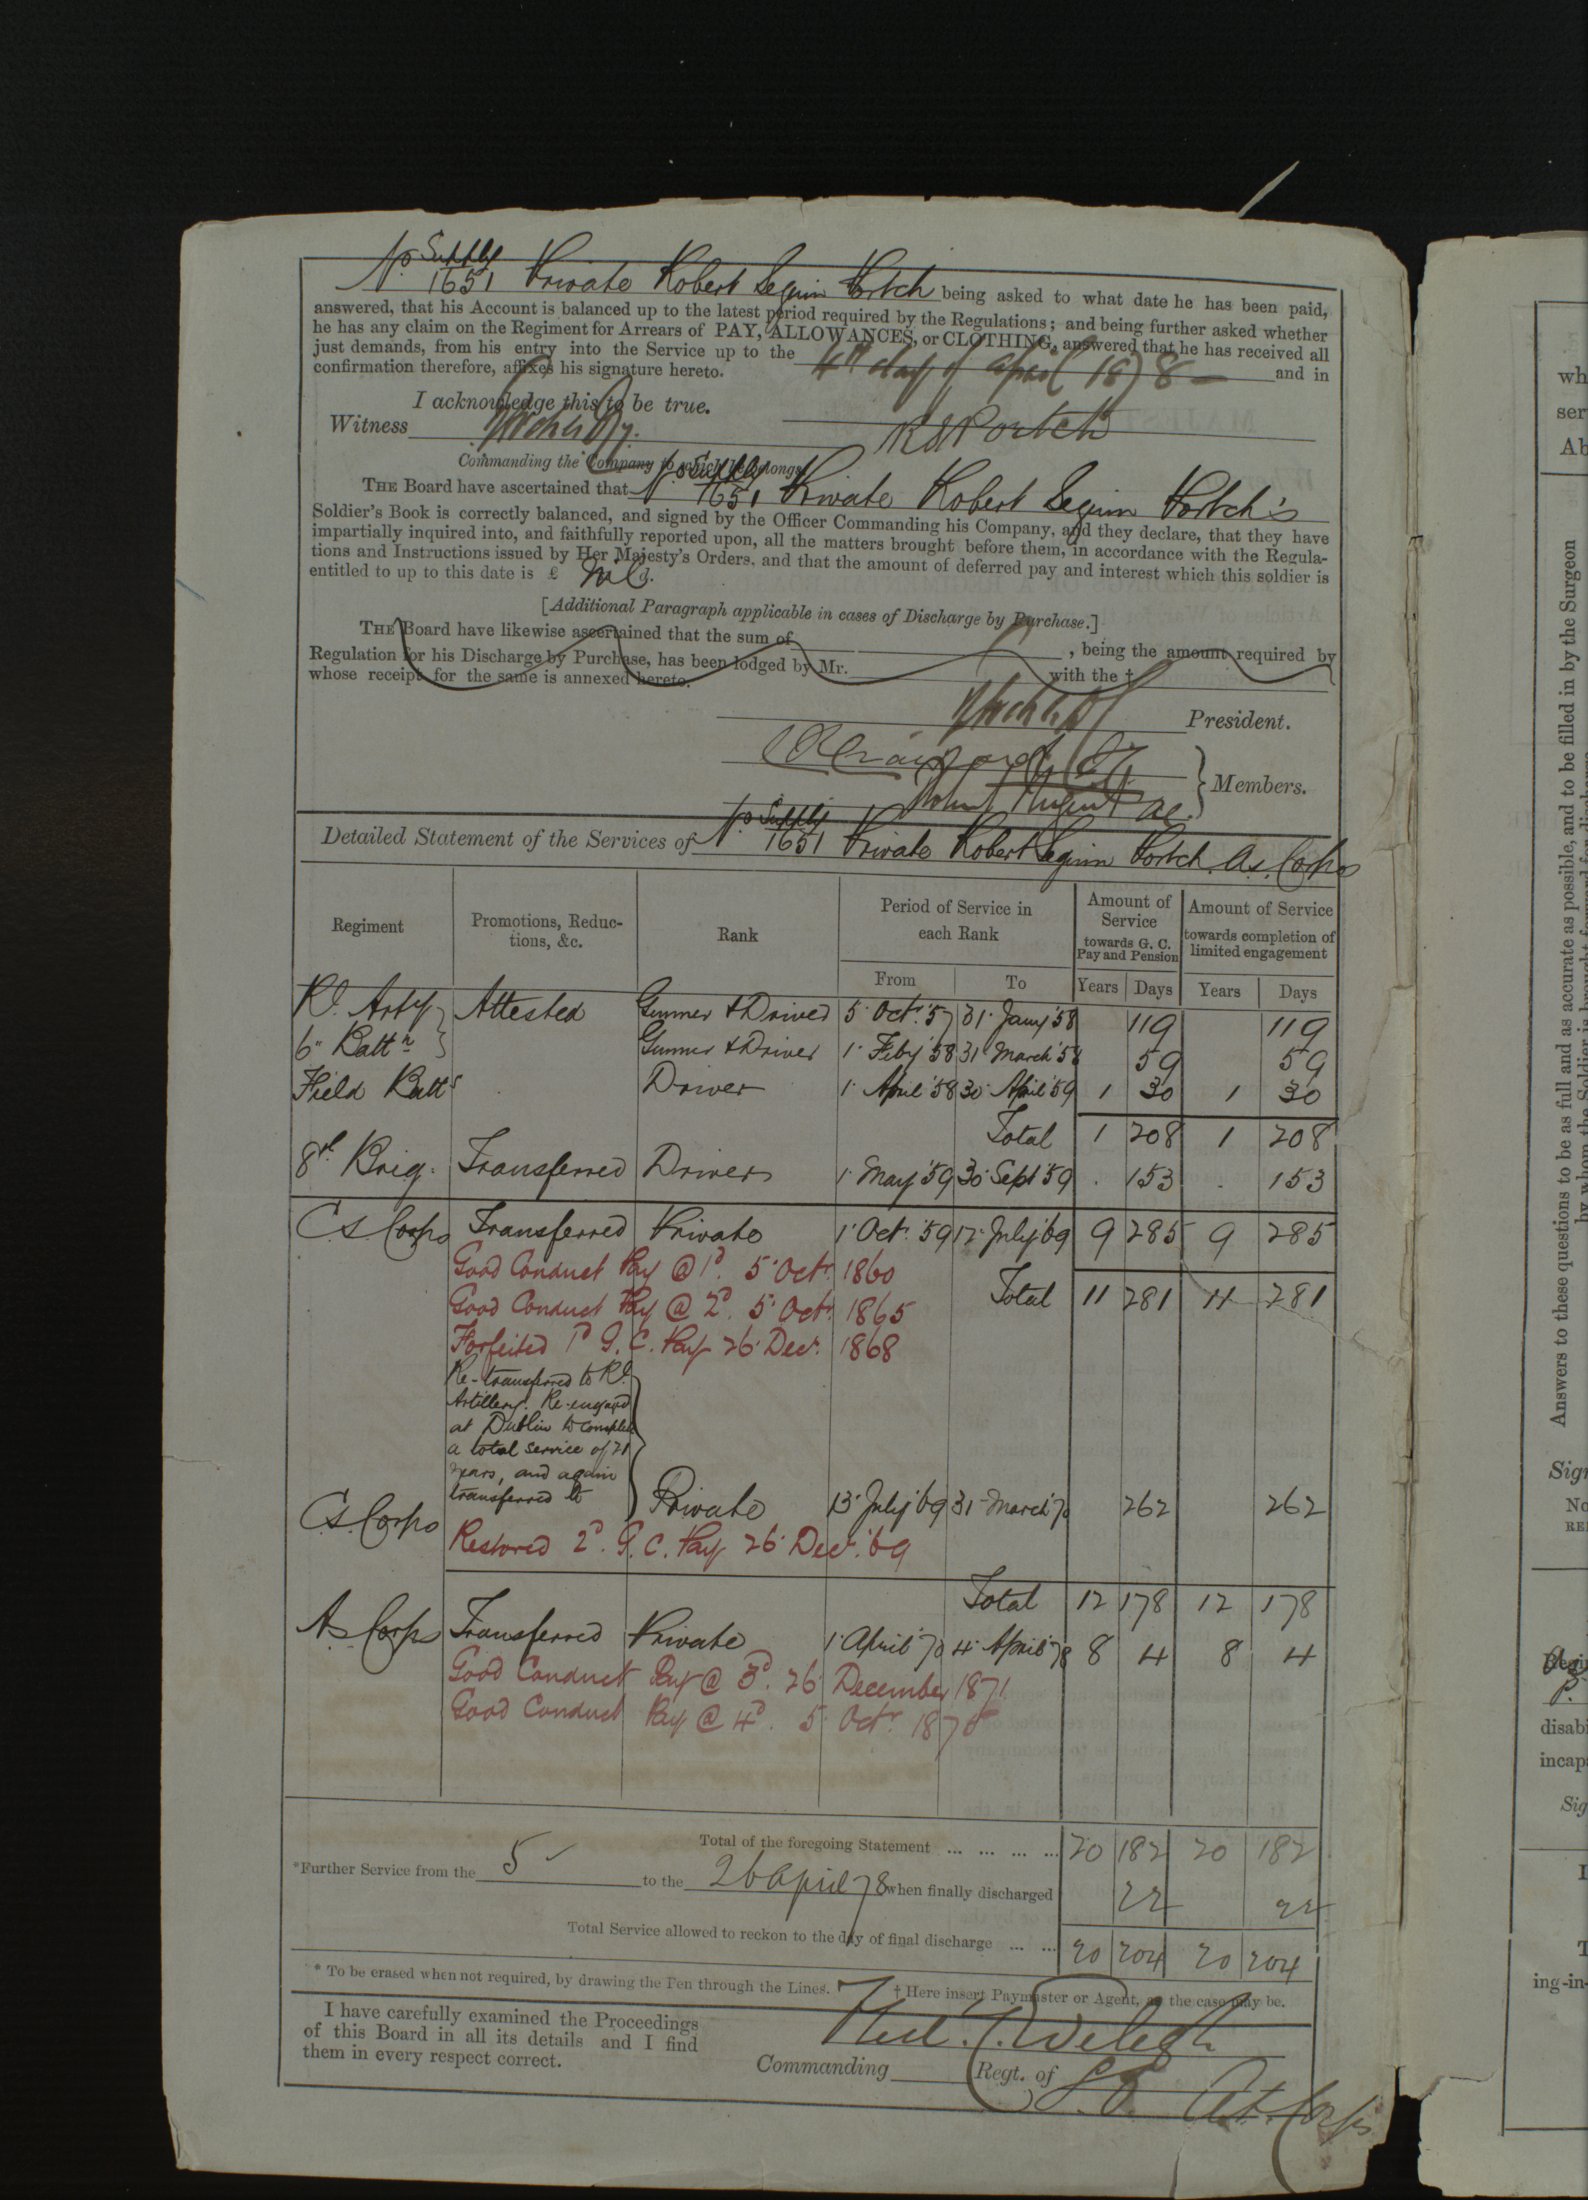 1878 discharge papers (2) for Robert Seguin Portch shows he served 20+ years, including 6 in Canada but was unfit for further service